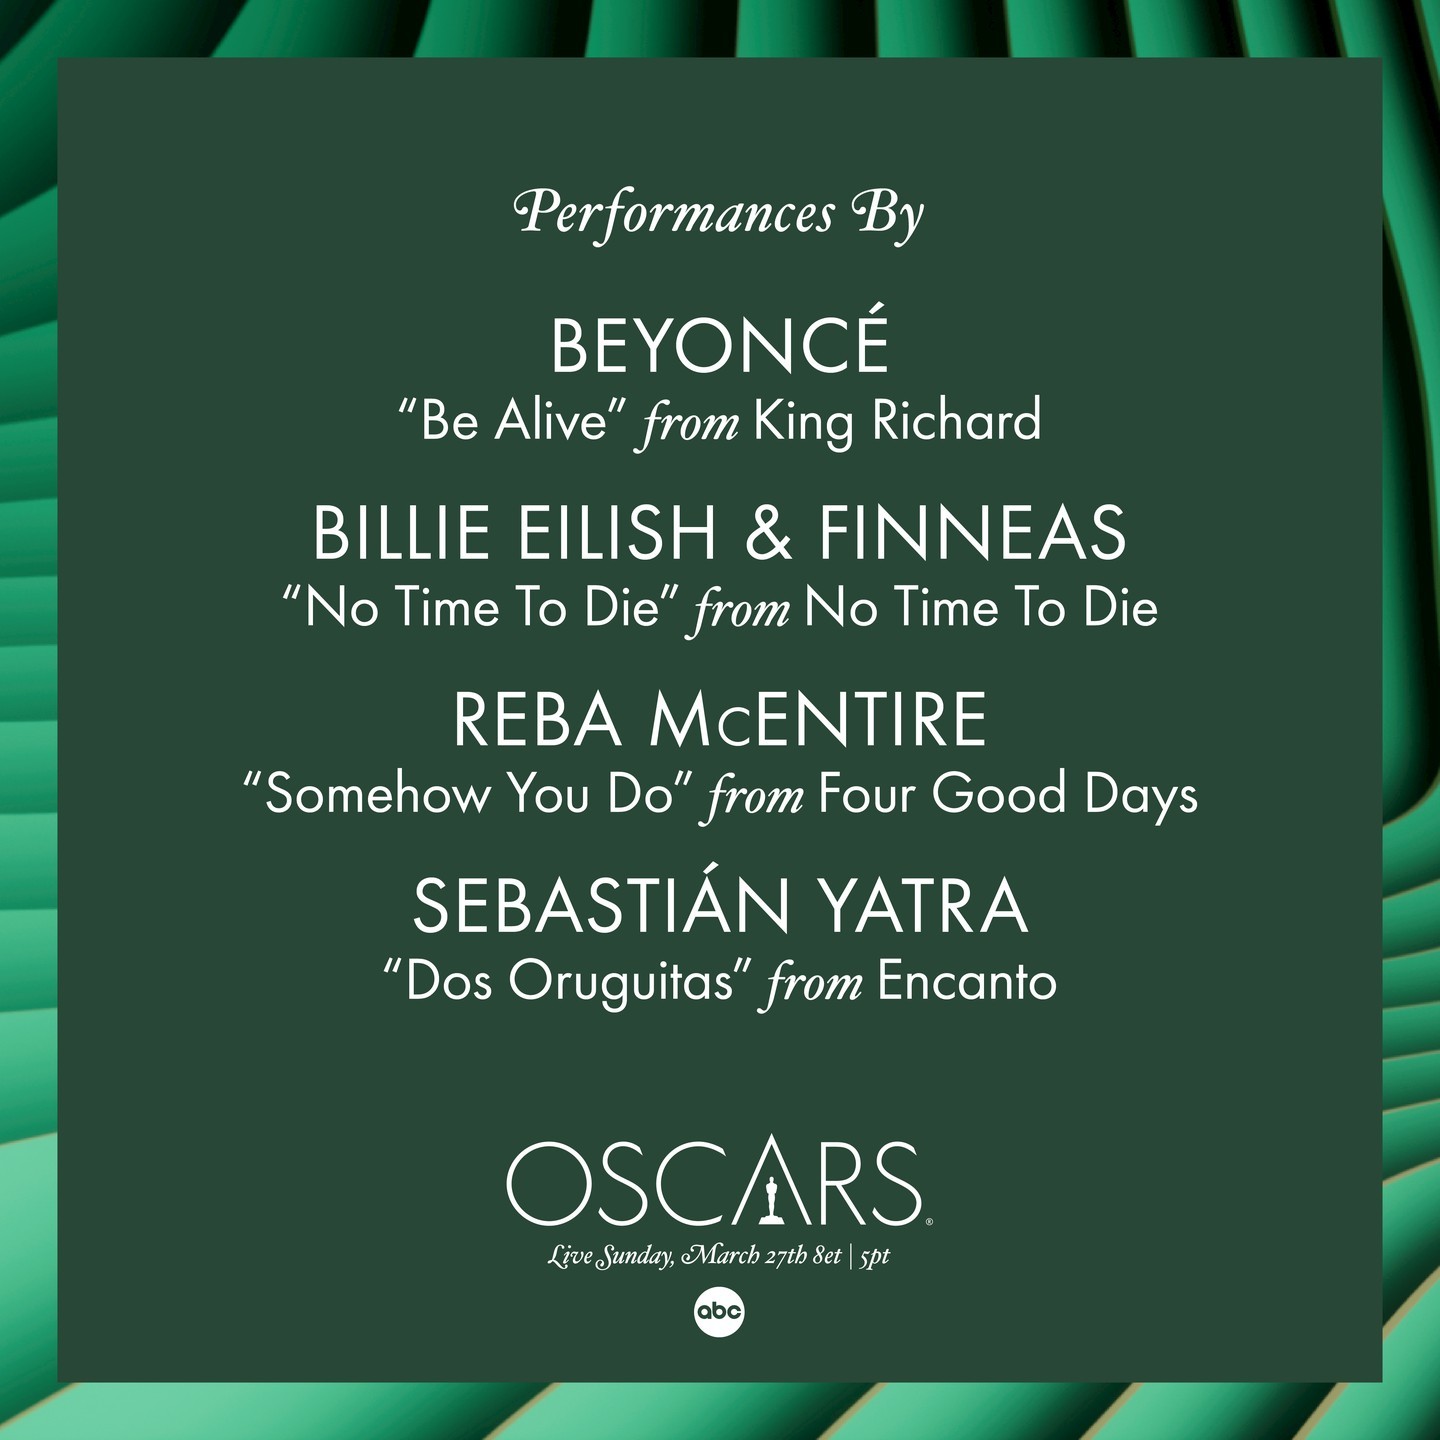 Beyonce, Billie Eilish, Finneas, &Amp; Reba Mcentire All Confirmed To Perform At The 2022 Oscars, Yours Truly, News, January 29, 2023